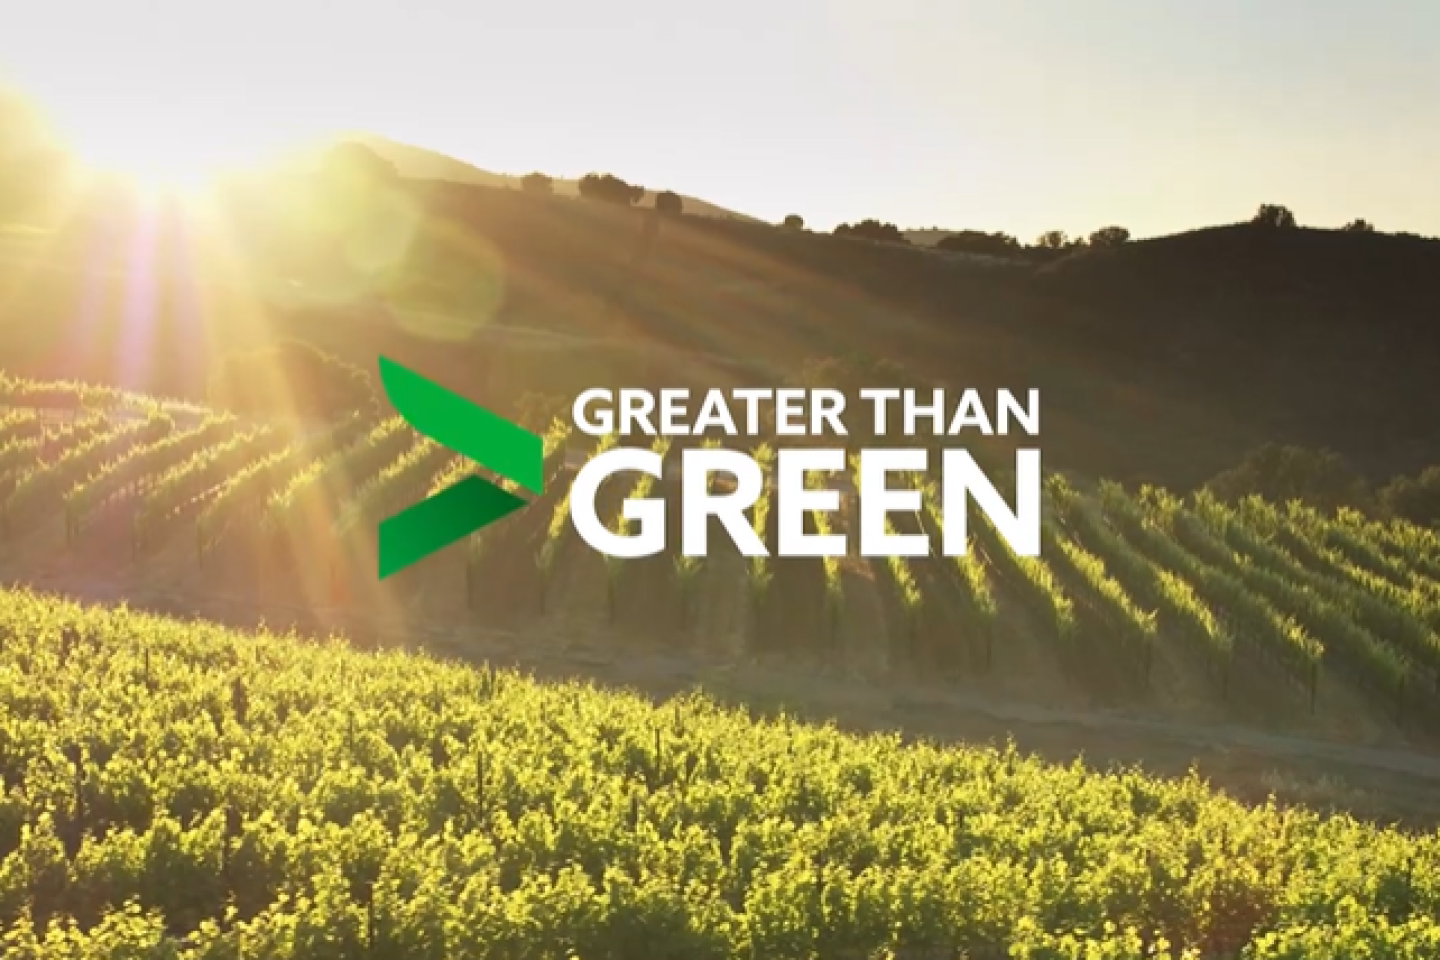 Greater than green